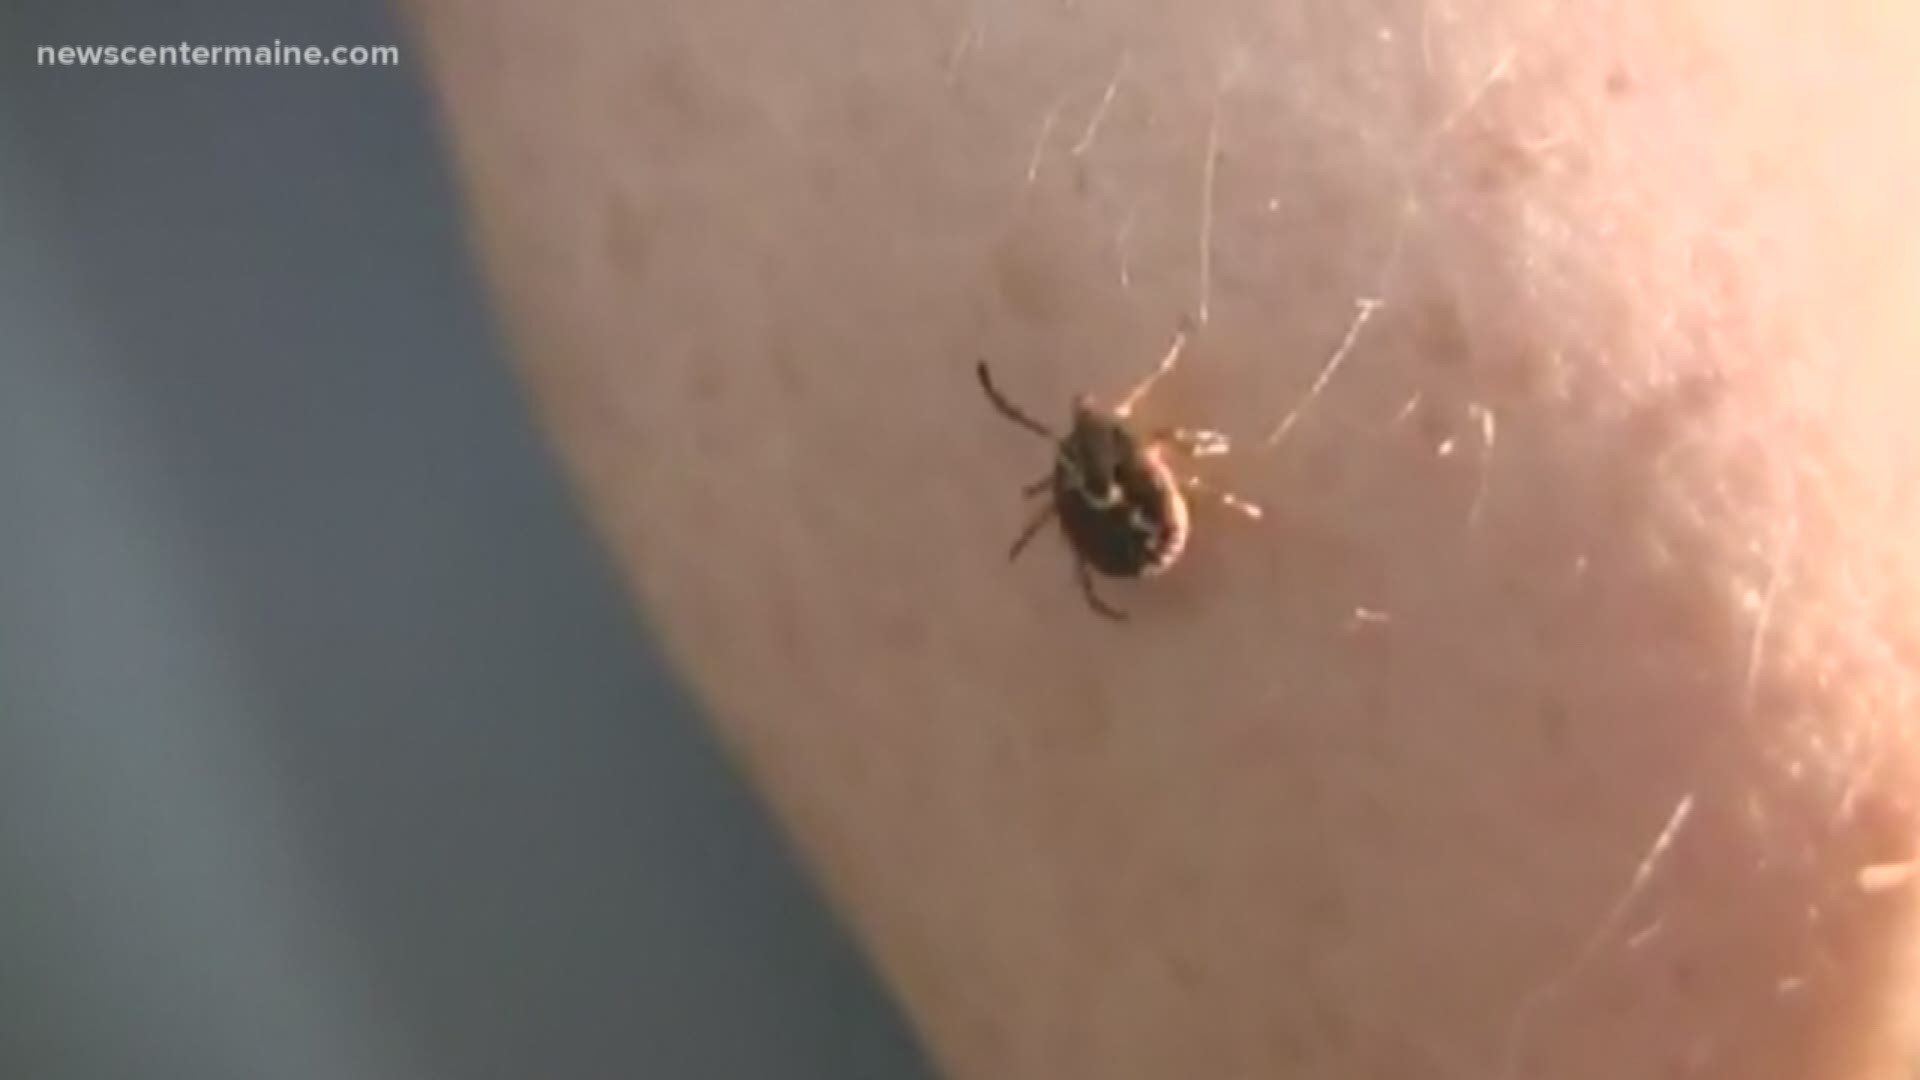 The UMaine Cooperative Extension Tick Lab will test for Lyme Disease, Anaplasmosis, and Babesia. The tests are $15 per tick for Maine residents.